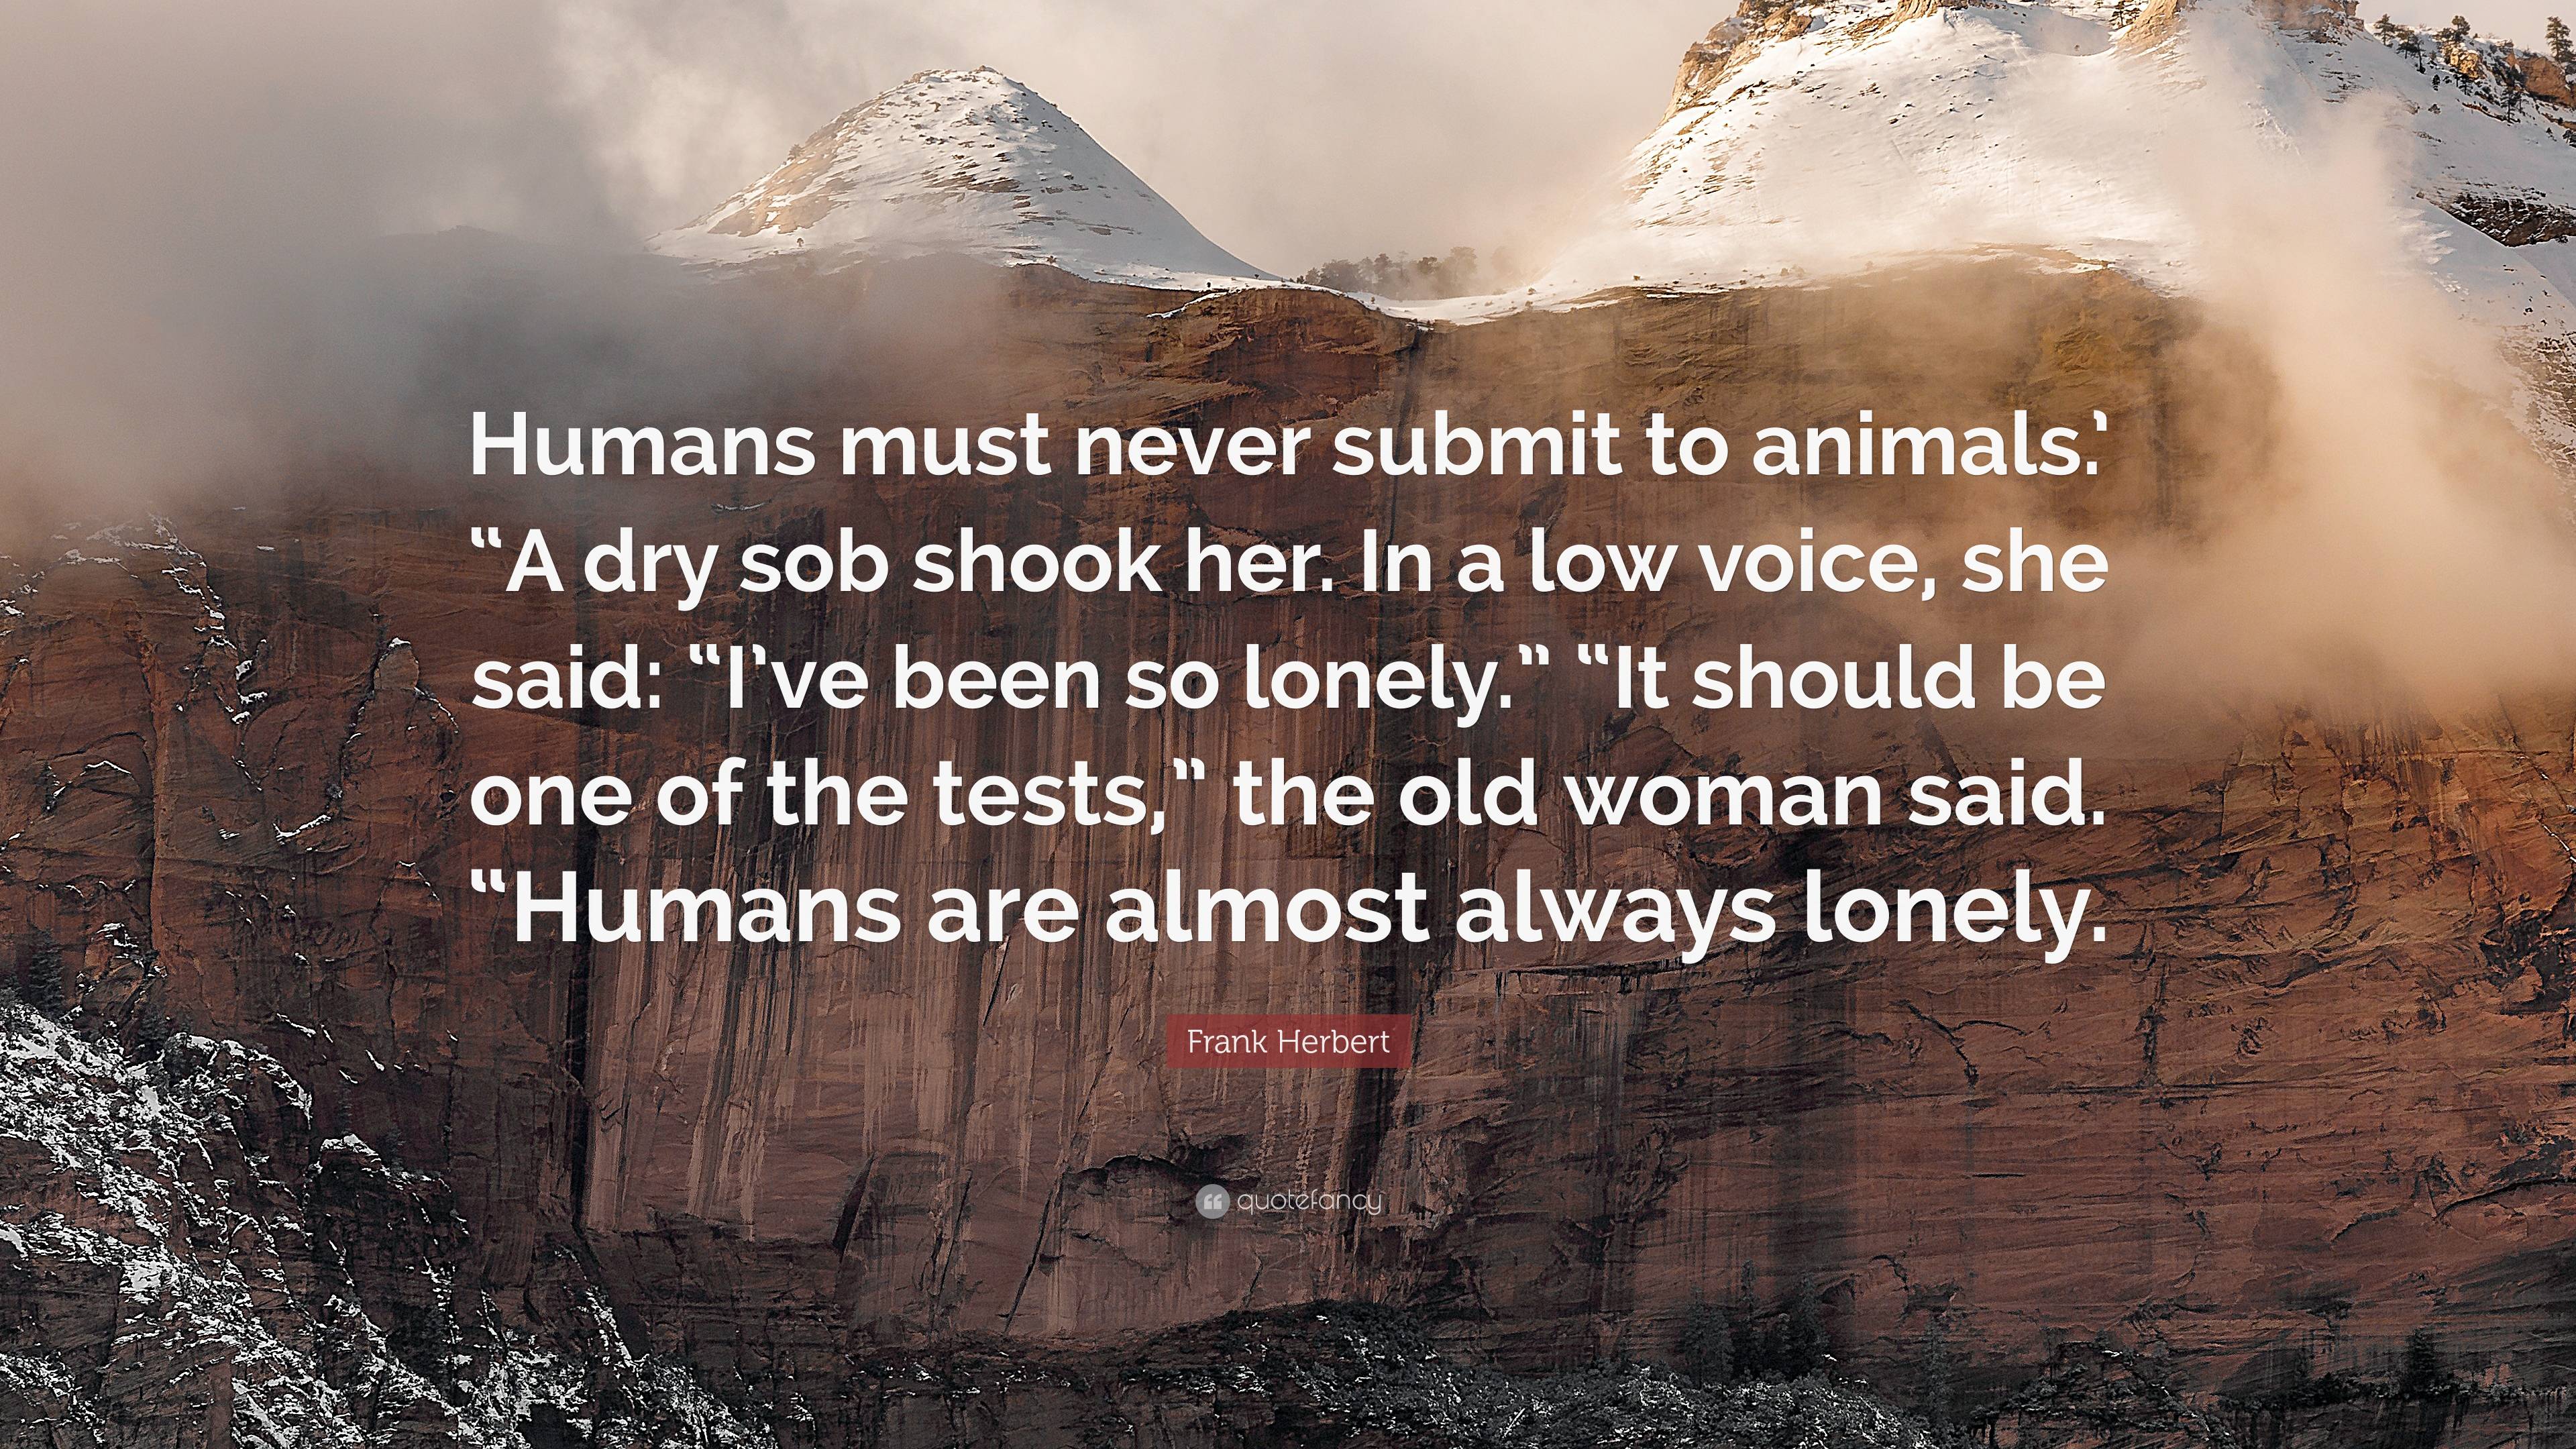 Frank Herbert Quote: “Humans must never submit to animals.' “A dry sob  shook her. In a low voice, she said: “I've been so lonely.” “It should ...”